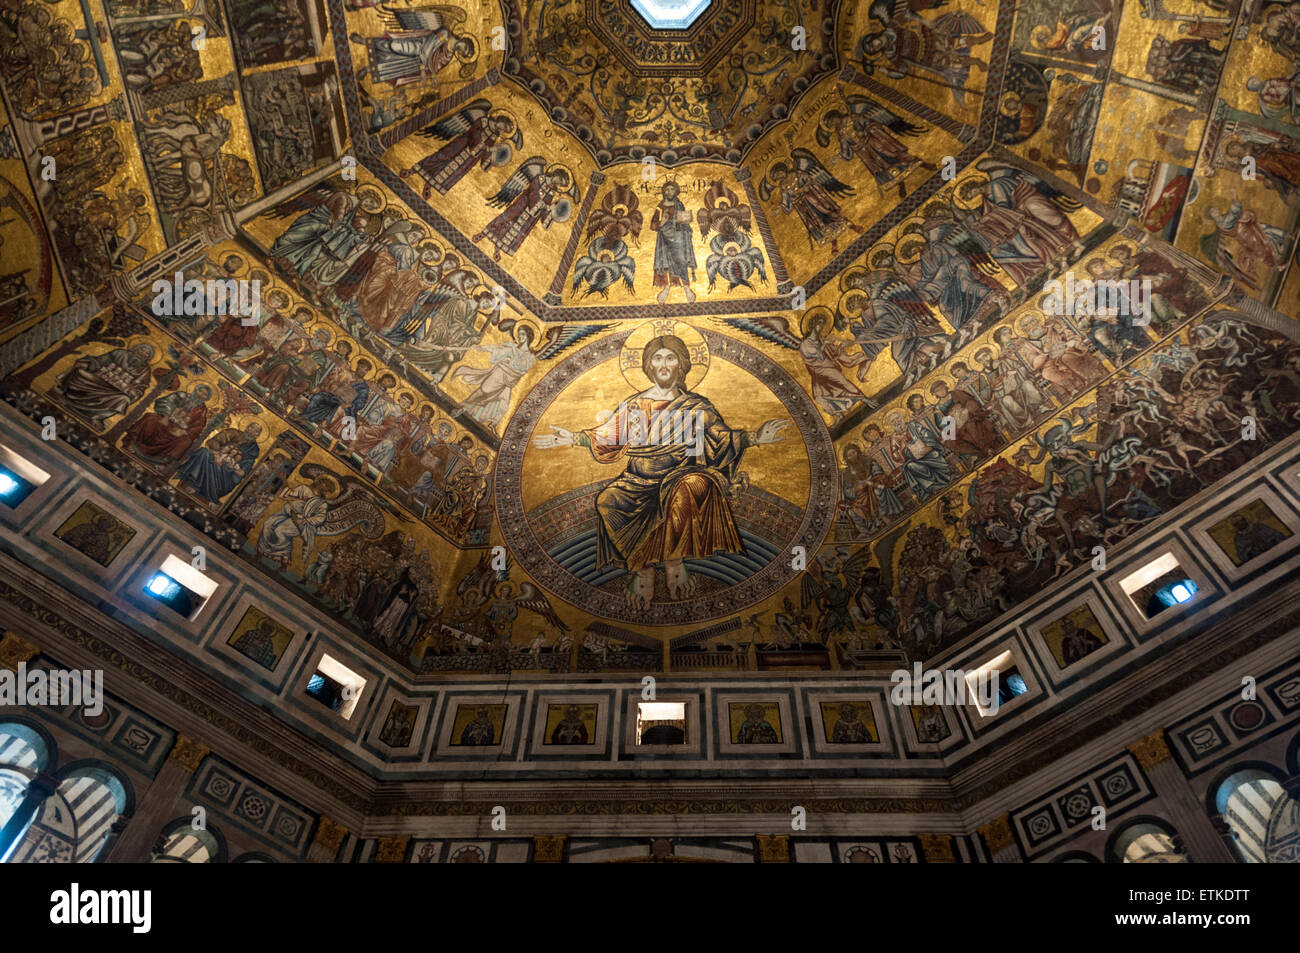 The Florence Baptistery, Battistero di San Giovanni also known as the Baptistry of Saint John, Florence, Italy Stock Photo